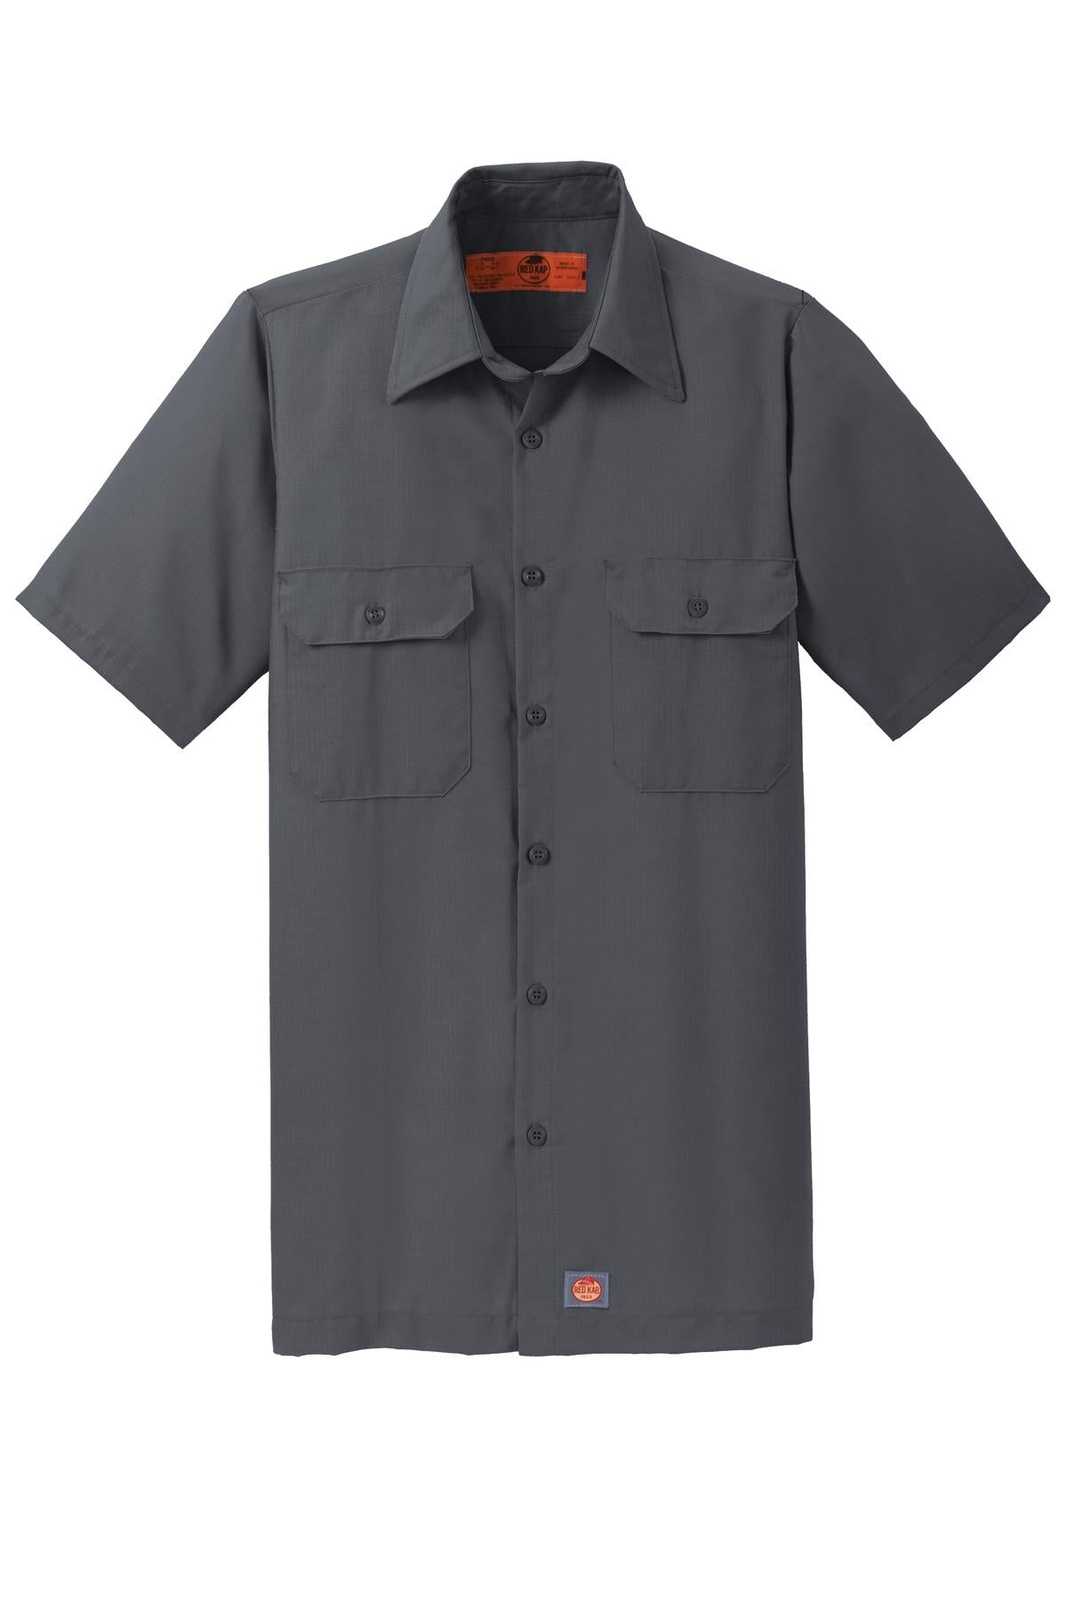 Red Kap SY60 Short Sleeve Solid Ripstop Shirt - Charcoal - HIT a Double - 3